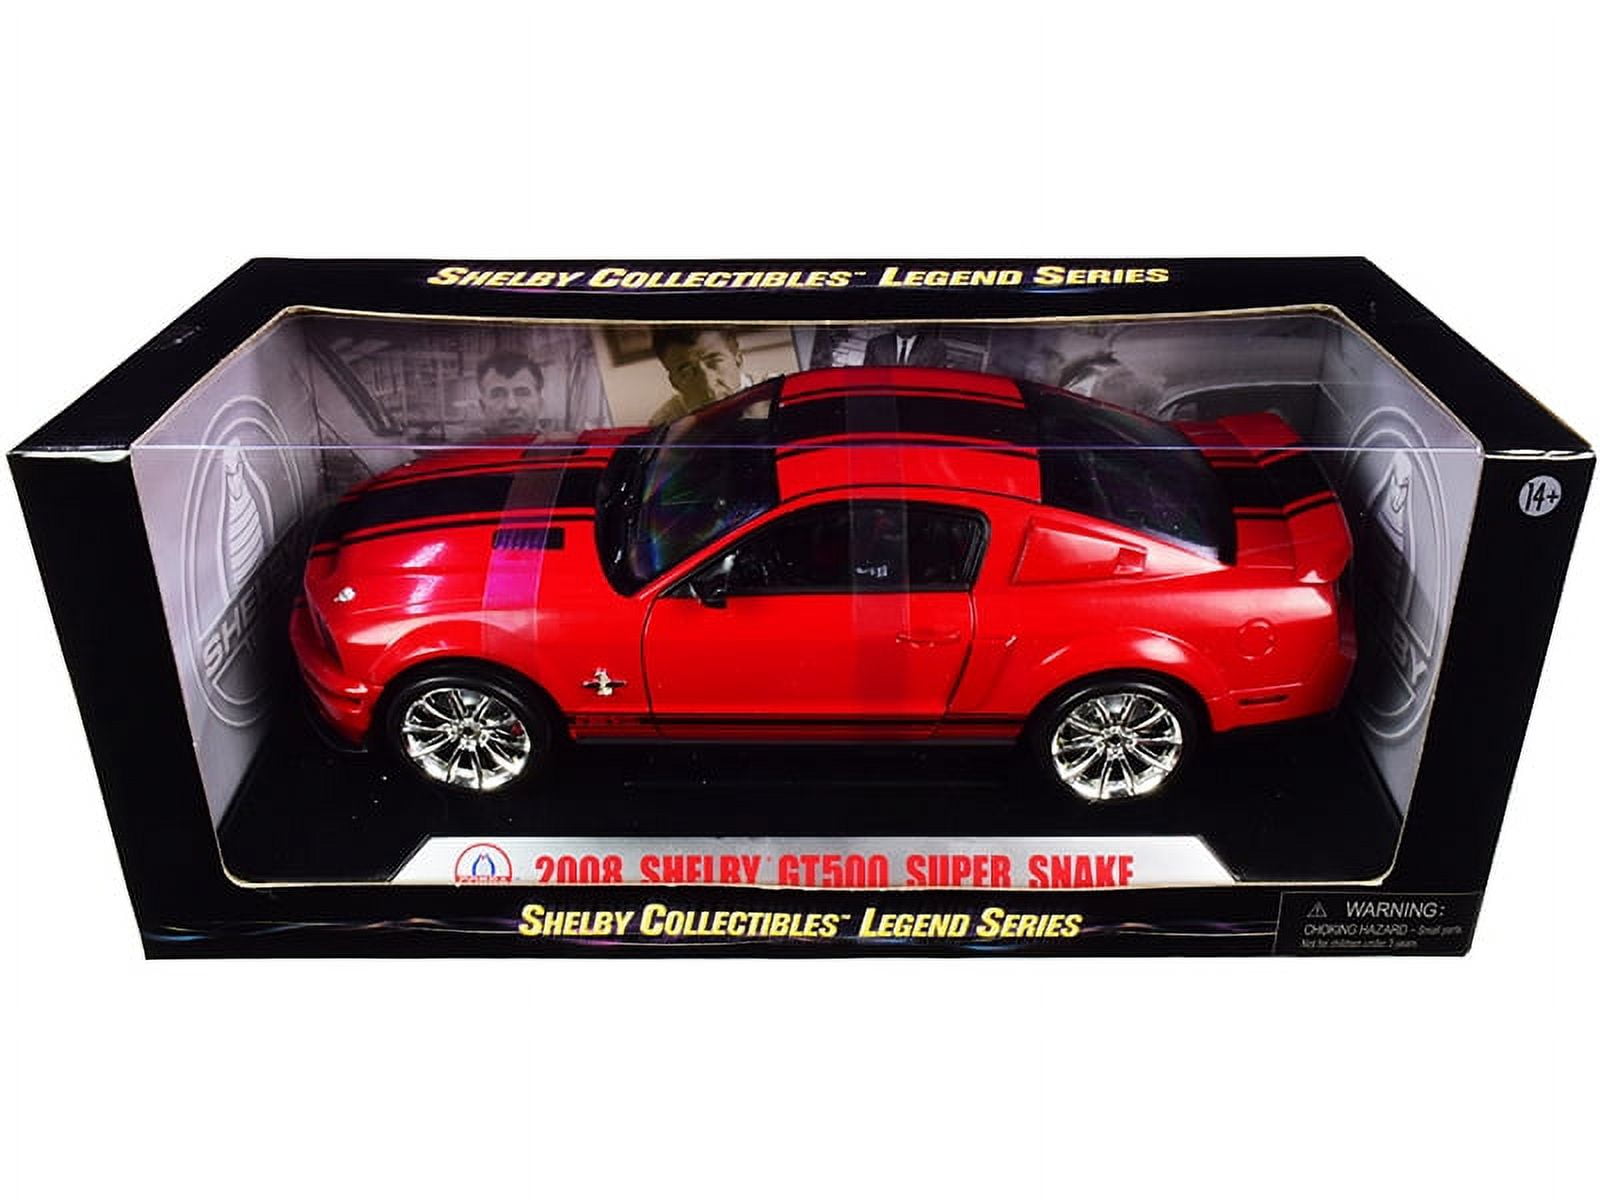 Picture of Shelby Collectibles SC313 Series 1-18 Diecast Model Car with Stripes Shelby Collectibles Legend for 2008 Ford Shelby Mustang GT500 Super&#44; Snake Red & Black